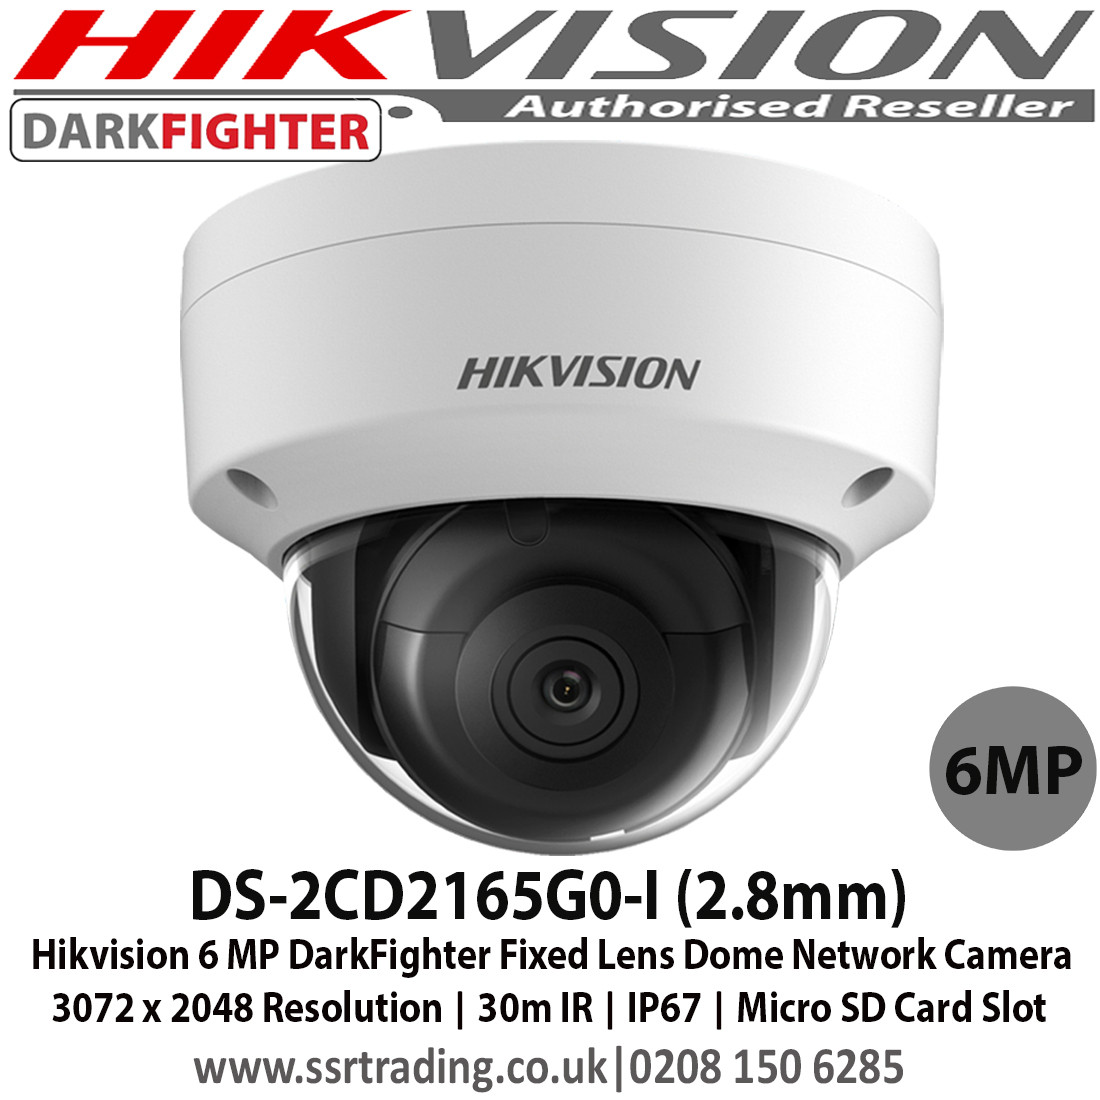 Hikvision DS-2CD2165G0-I (2.8mm) 6MP DarkFighter Fixed Lens Dome Network  Camera 3072 x 2048 Resolution, 30m IR, IP67, IK10, Micro SD Card Slot